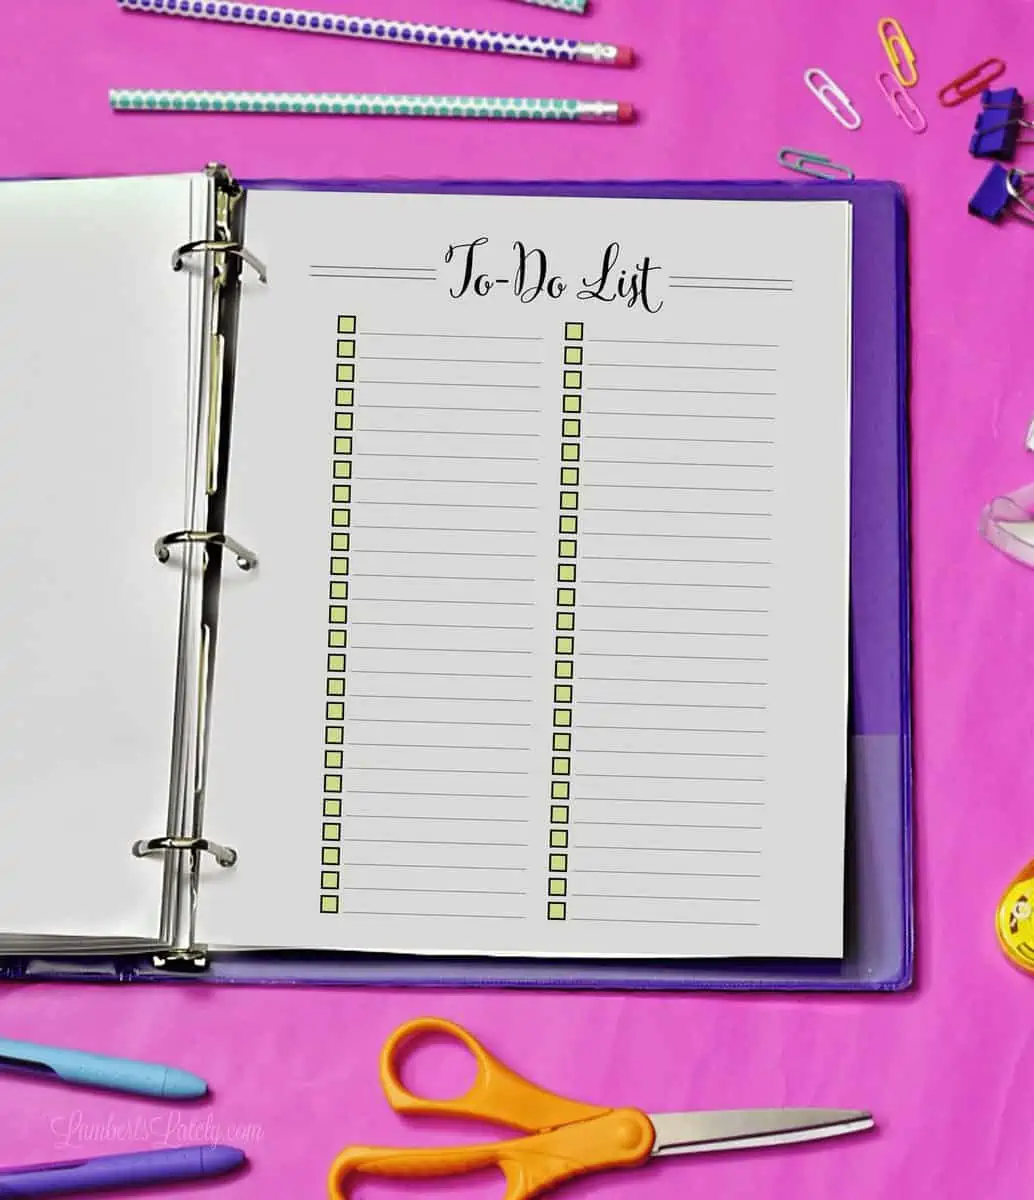 to do list printable in a purple notebook.